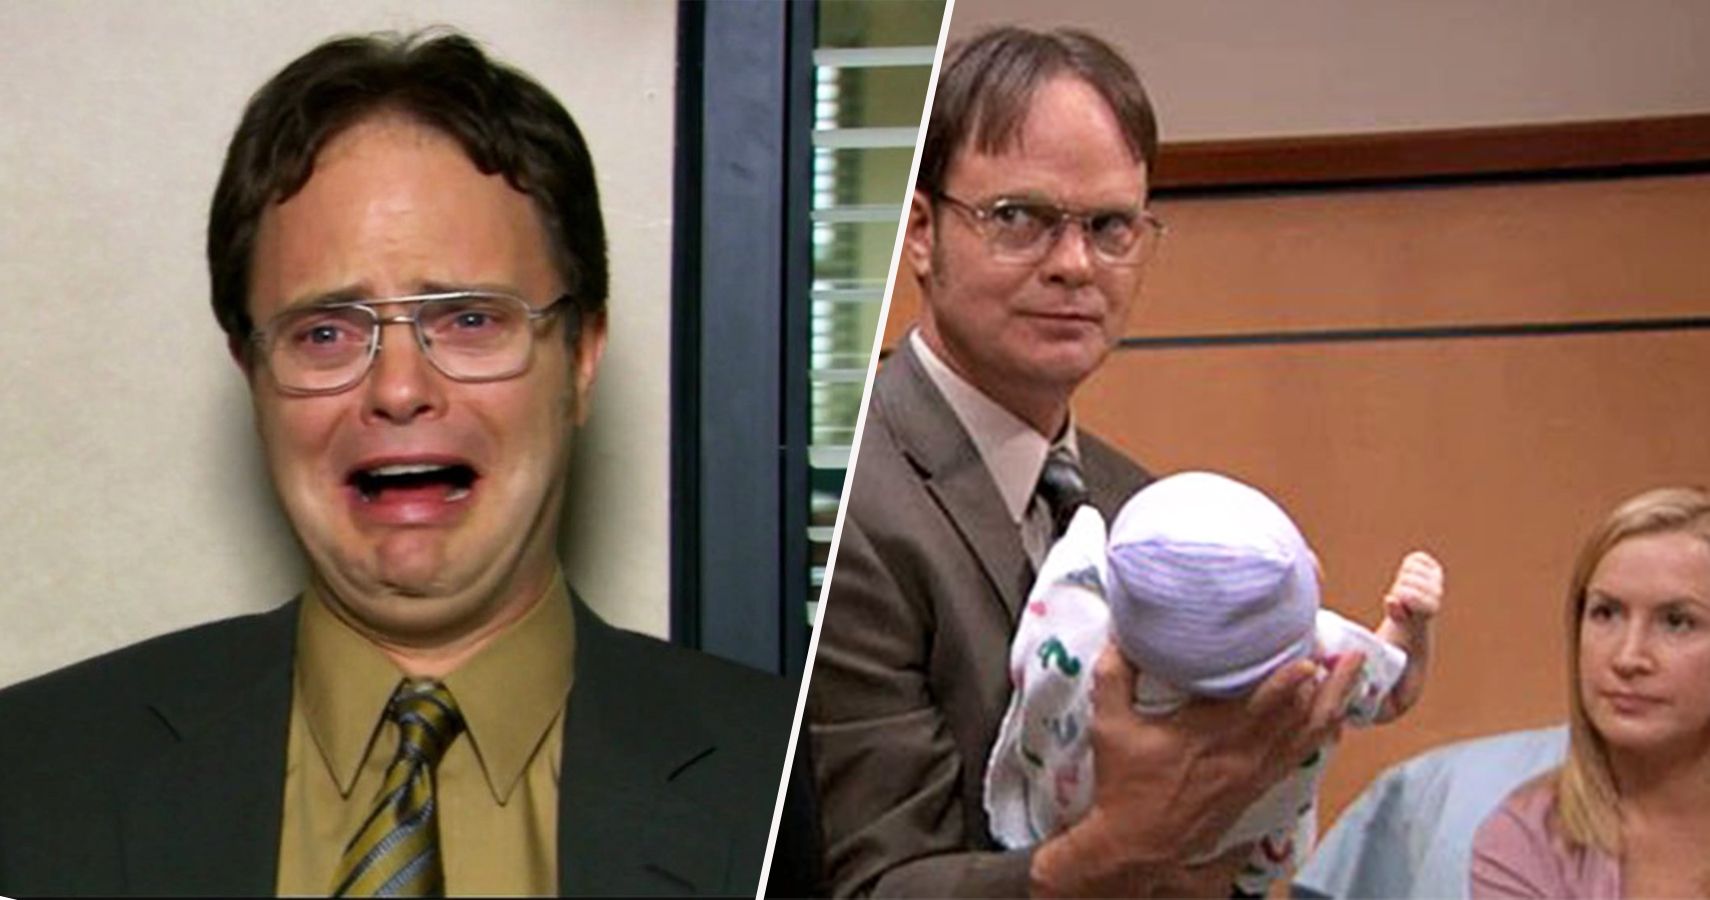 The Office: 15 Of The Best Dwight Schrute Quotes